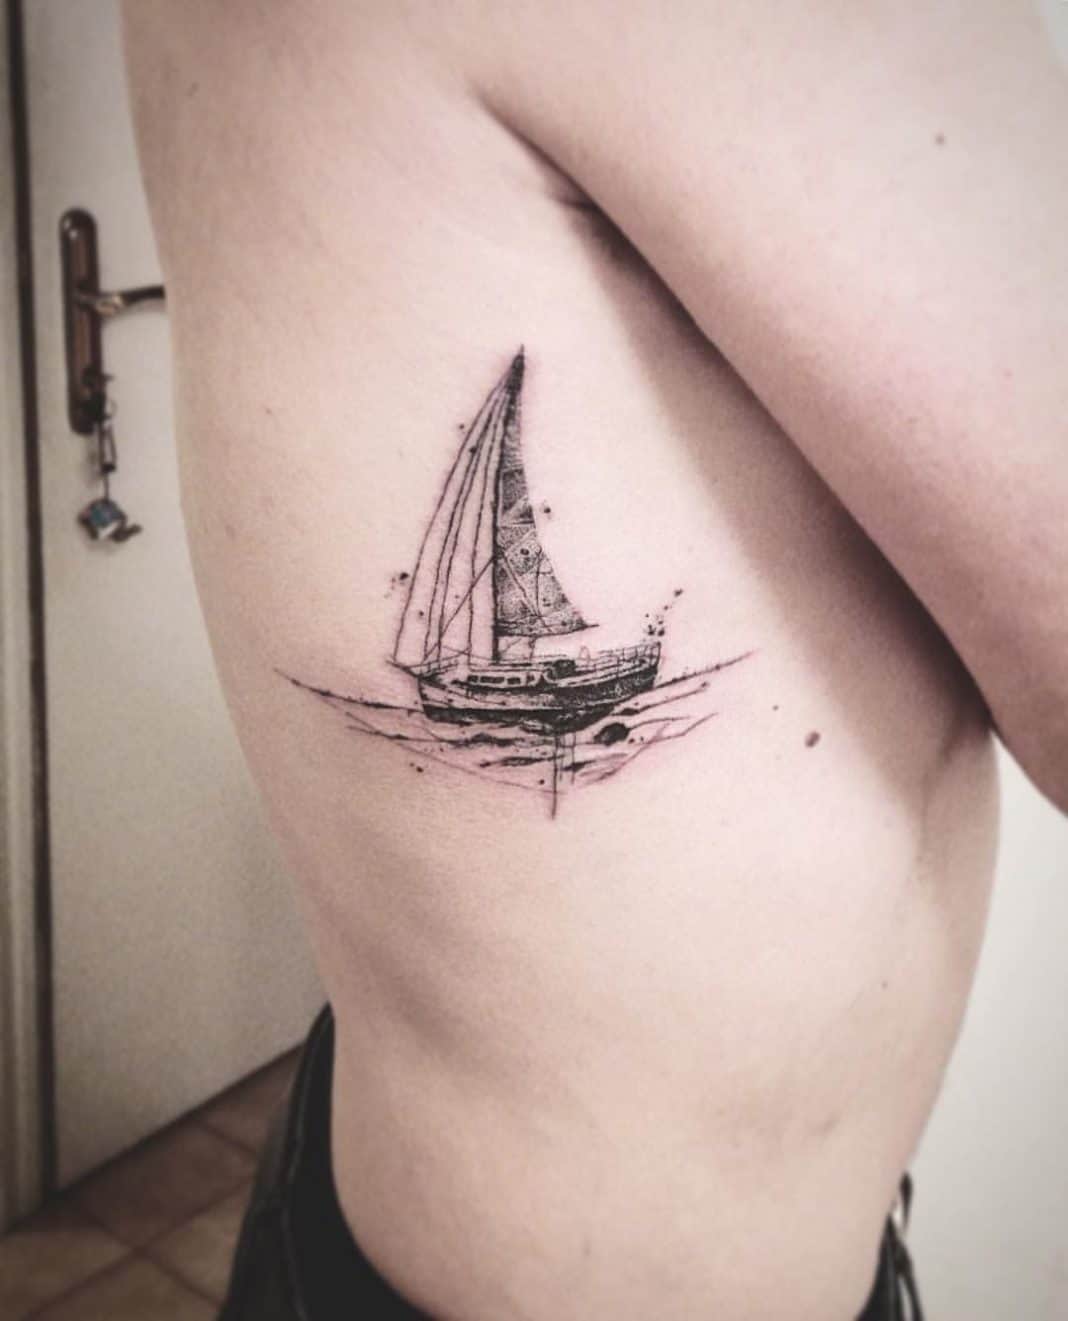 100 of the Most Incredible Ocean Tattoo Ideas - Inspiration Guaranteed!